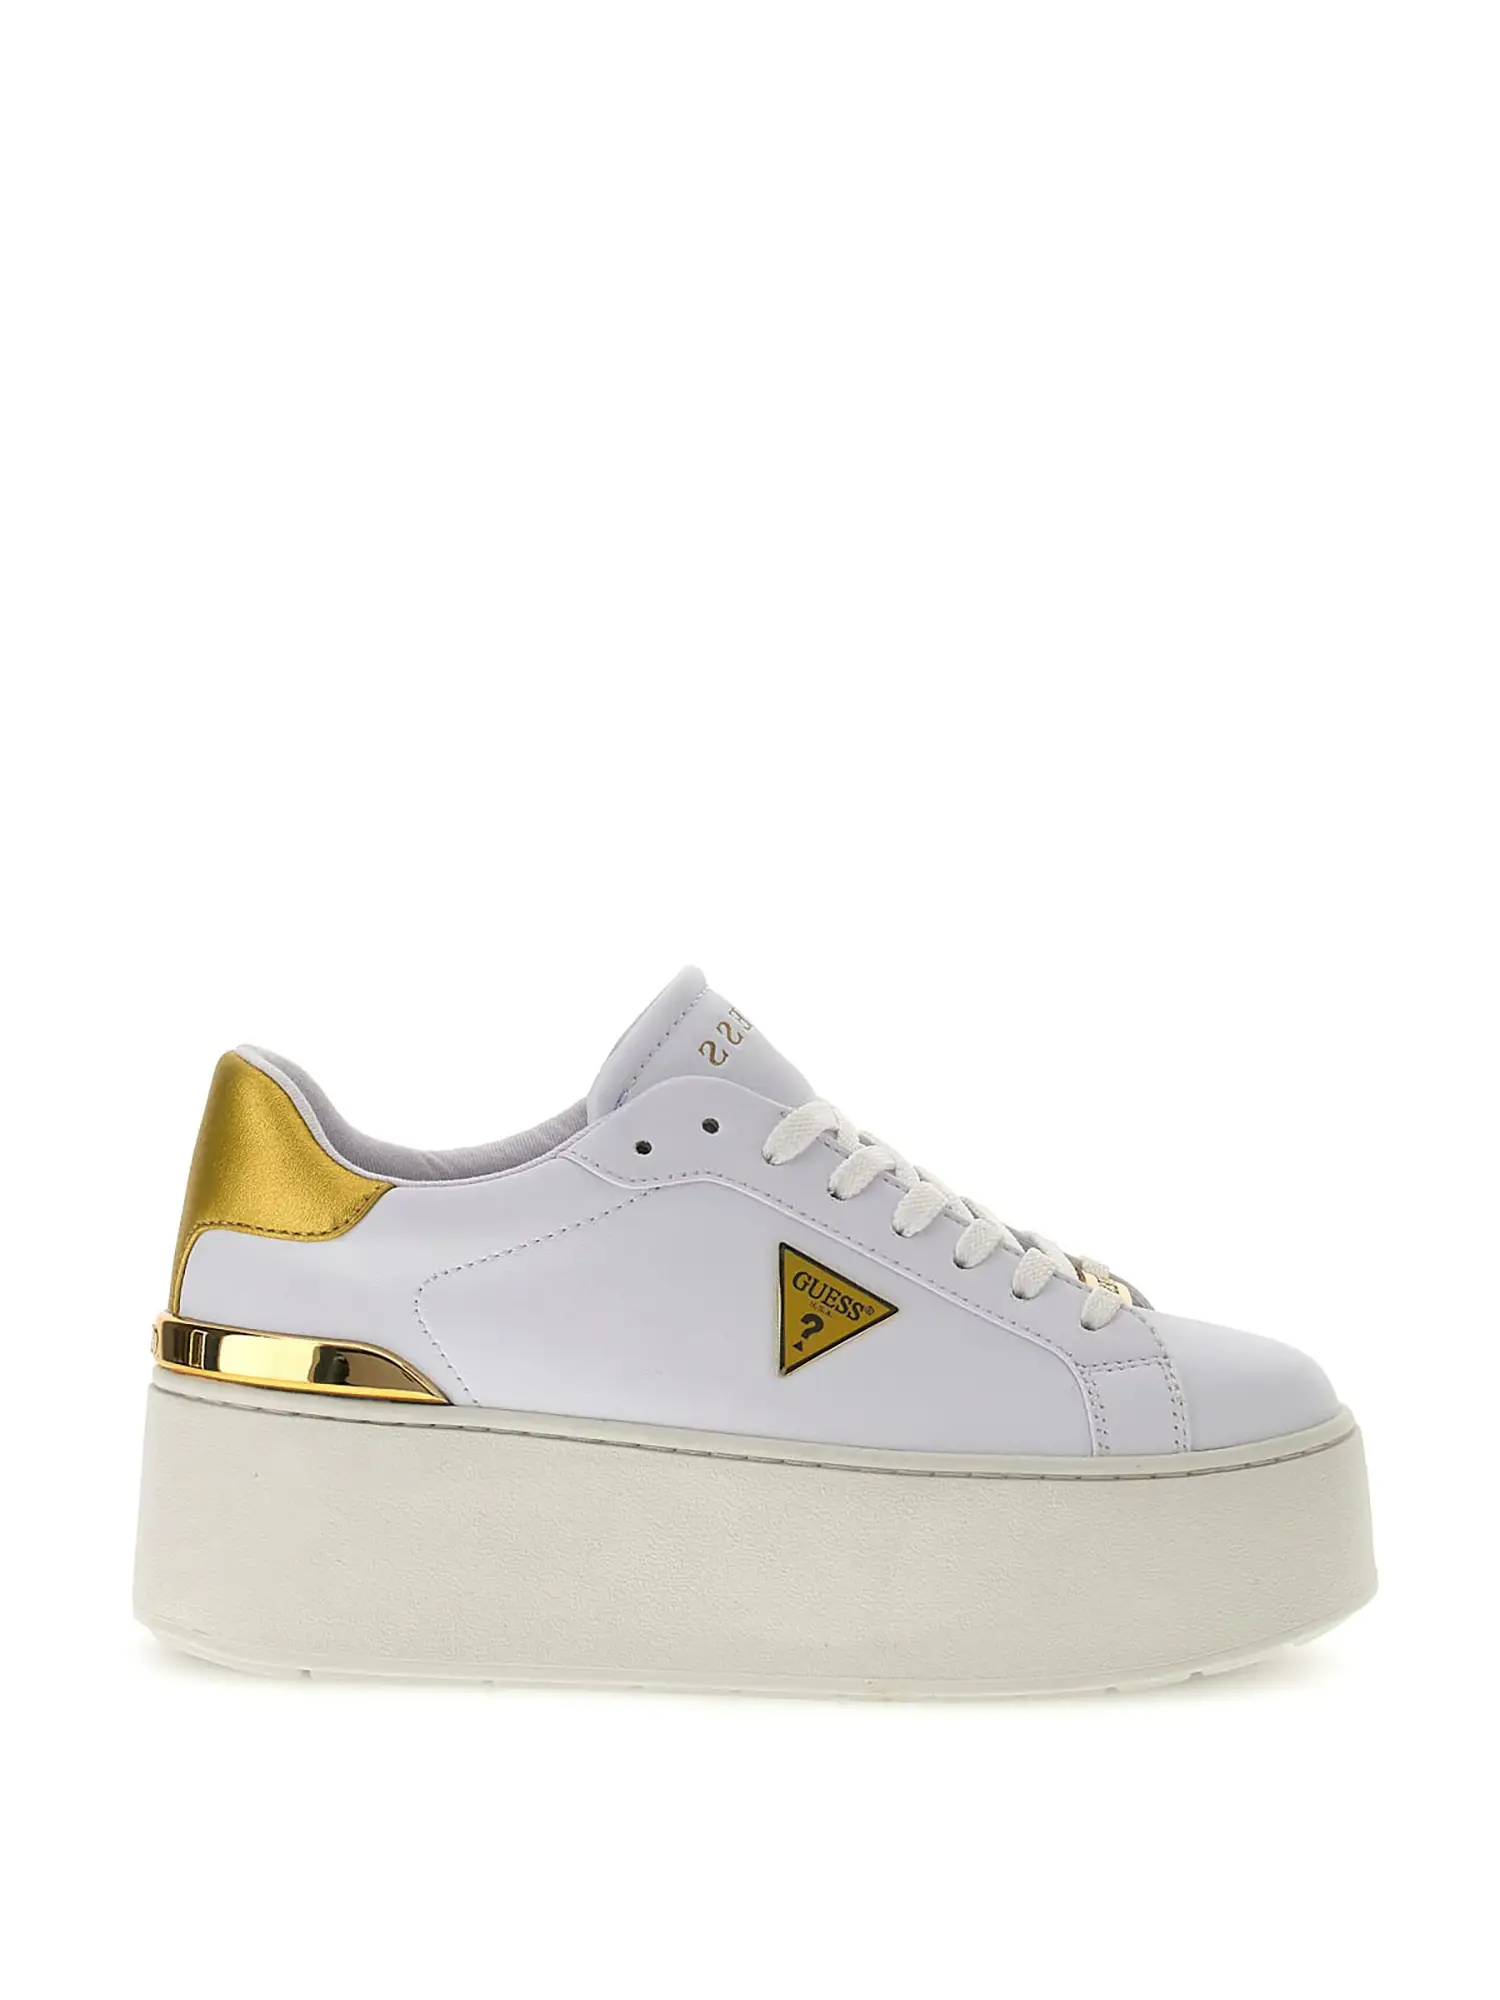 SNEAKERS DONNA - GUESS - FLPWLL LEL12 - BIANCO/ORO, 36